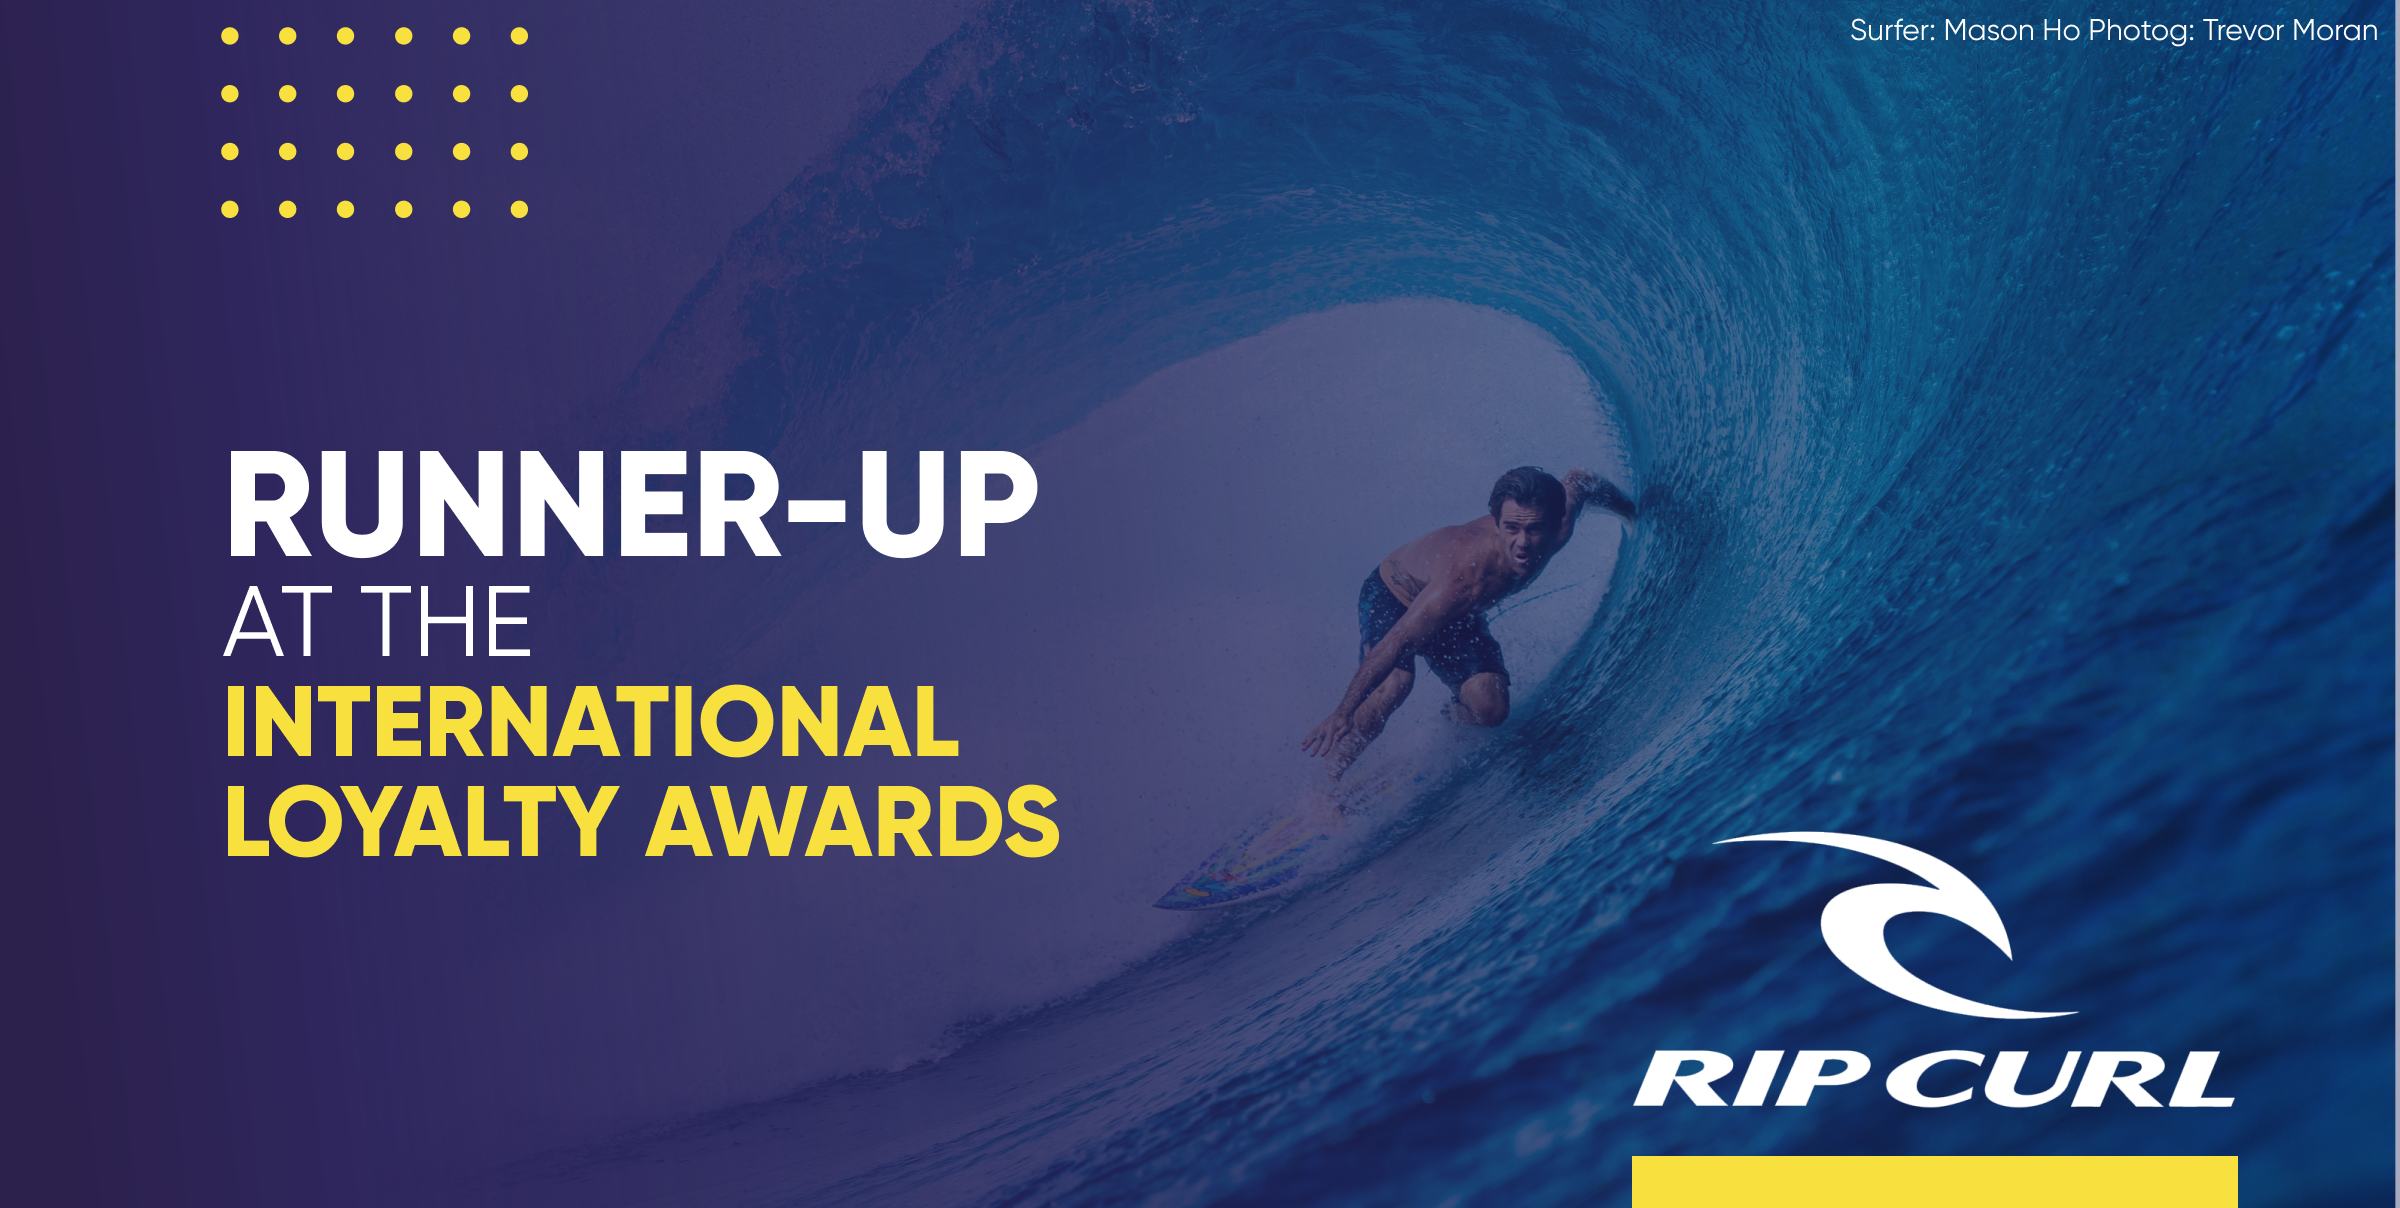 Image for the International Loyalty Awards Club Rip Curl news article